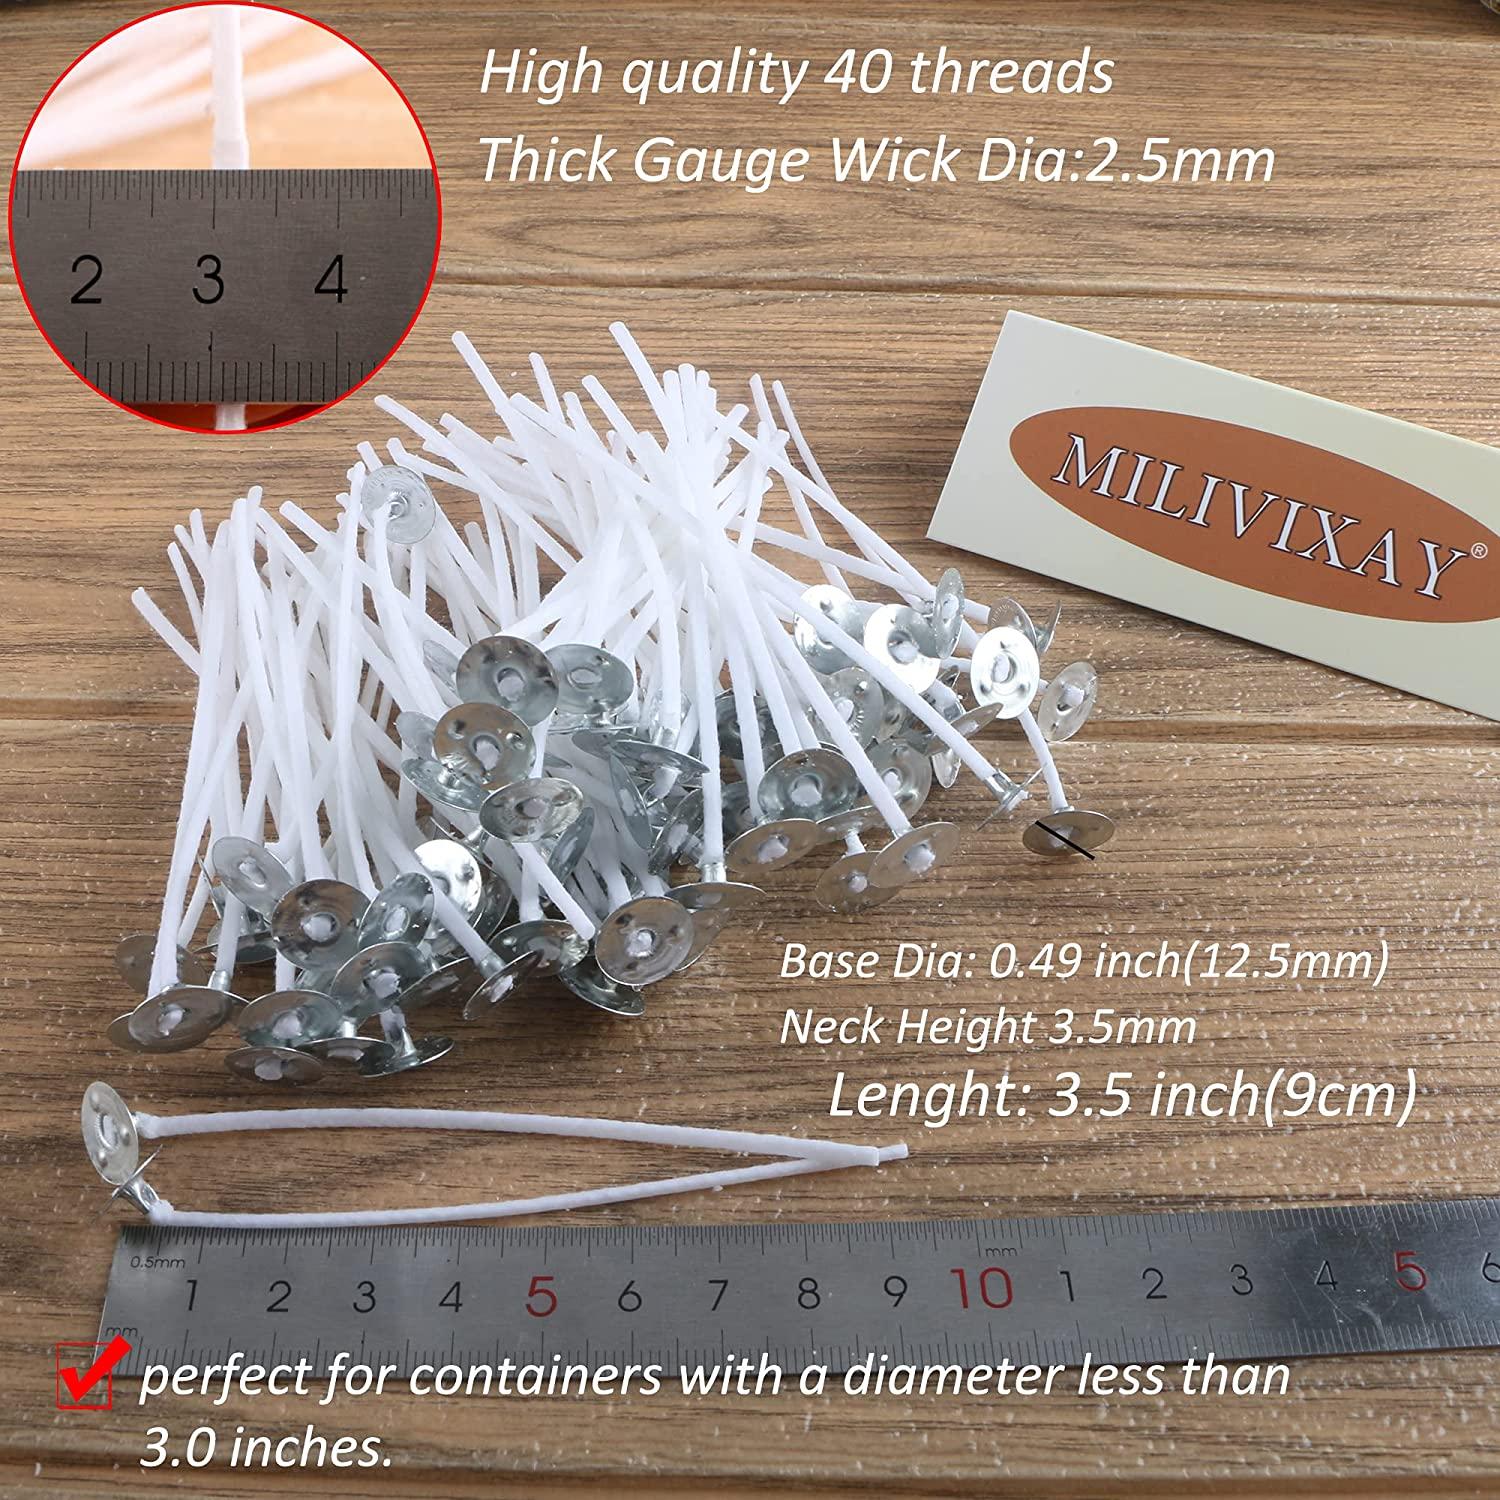  MILIVIXAY 100PCS 10 inch Candle Wicks with 100 Metal Tabs,  100PCS Candle Wick Stickers and 6PCS Wooden Candle Wick Holders - Wicks  Coated with Paraffin Wax, Cotton Wicks Kits for Candle Making.